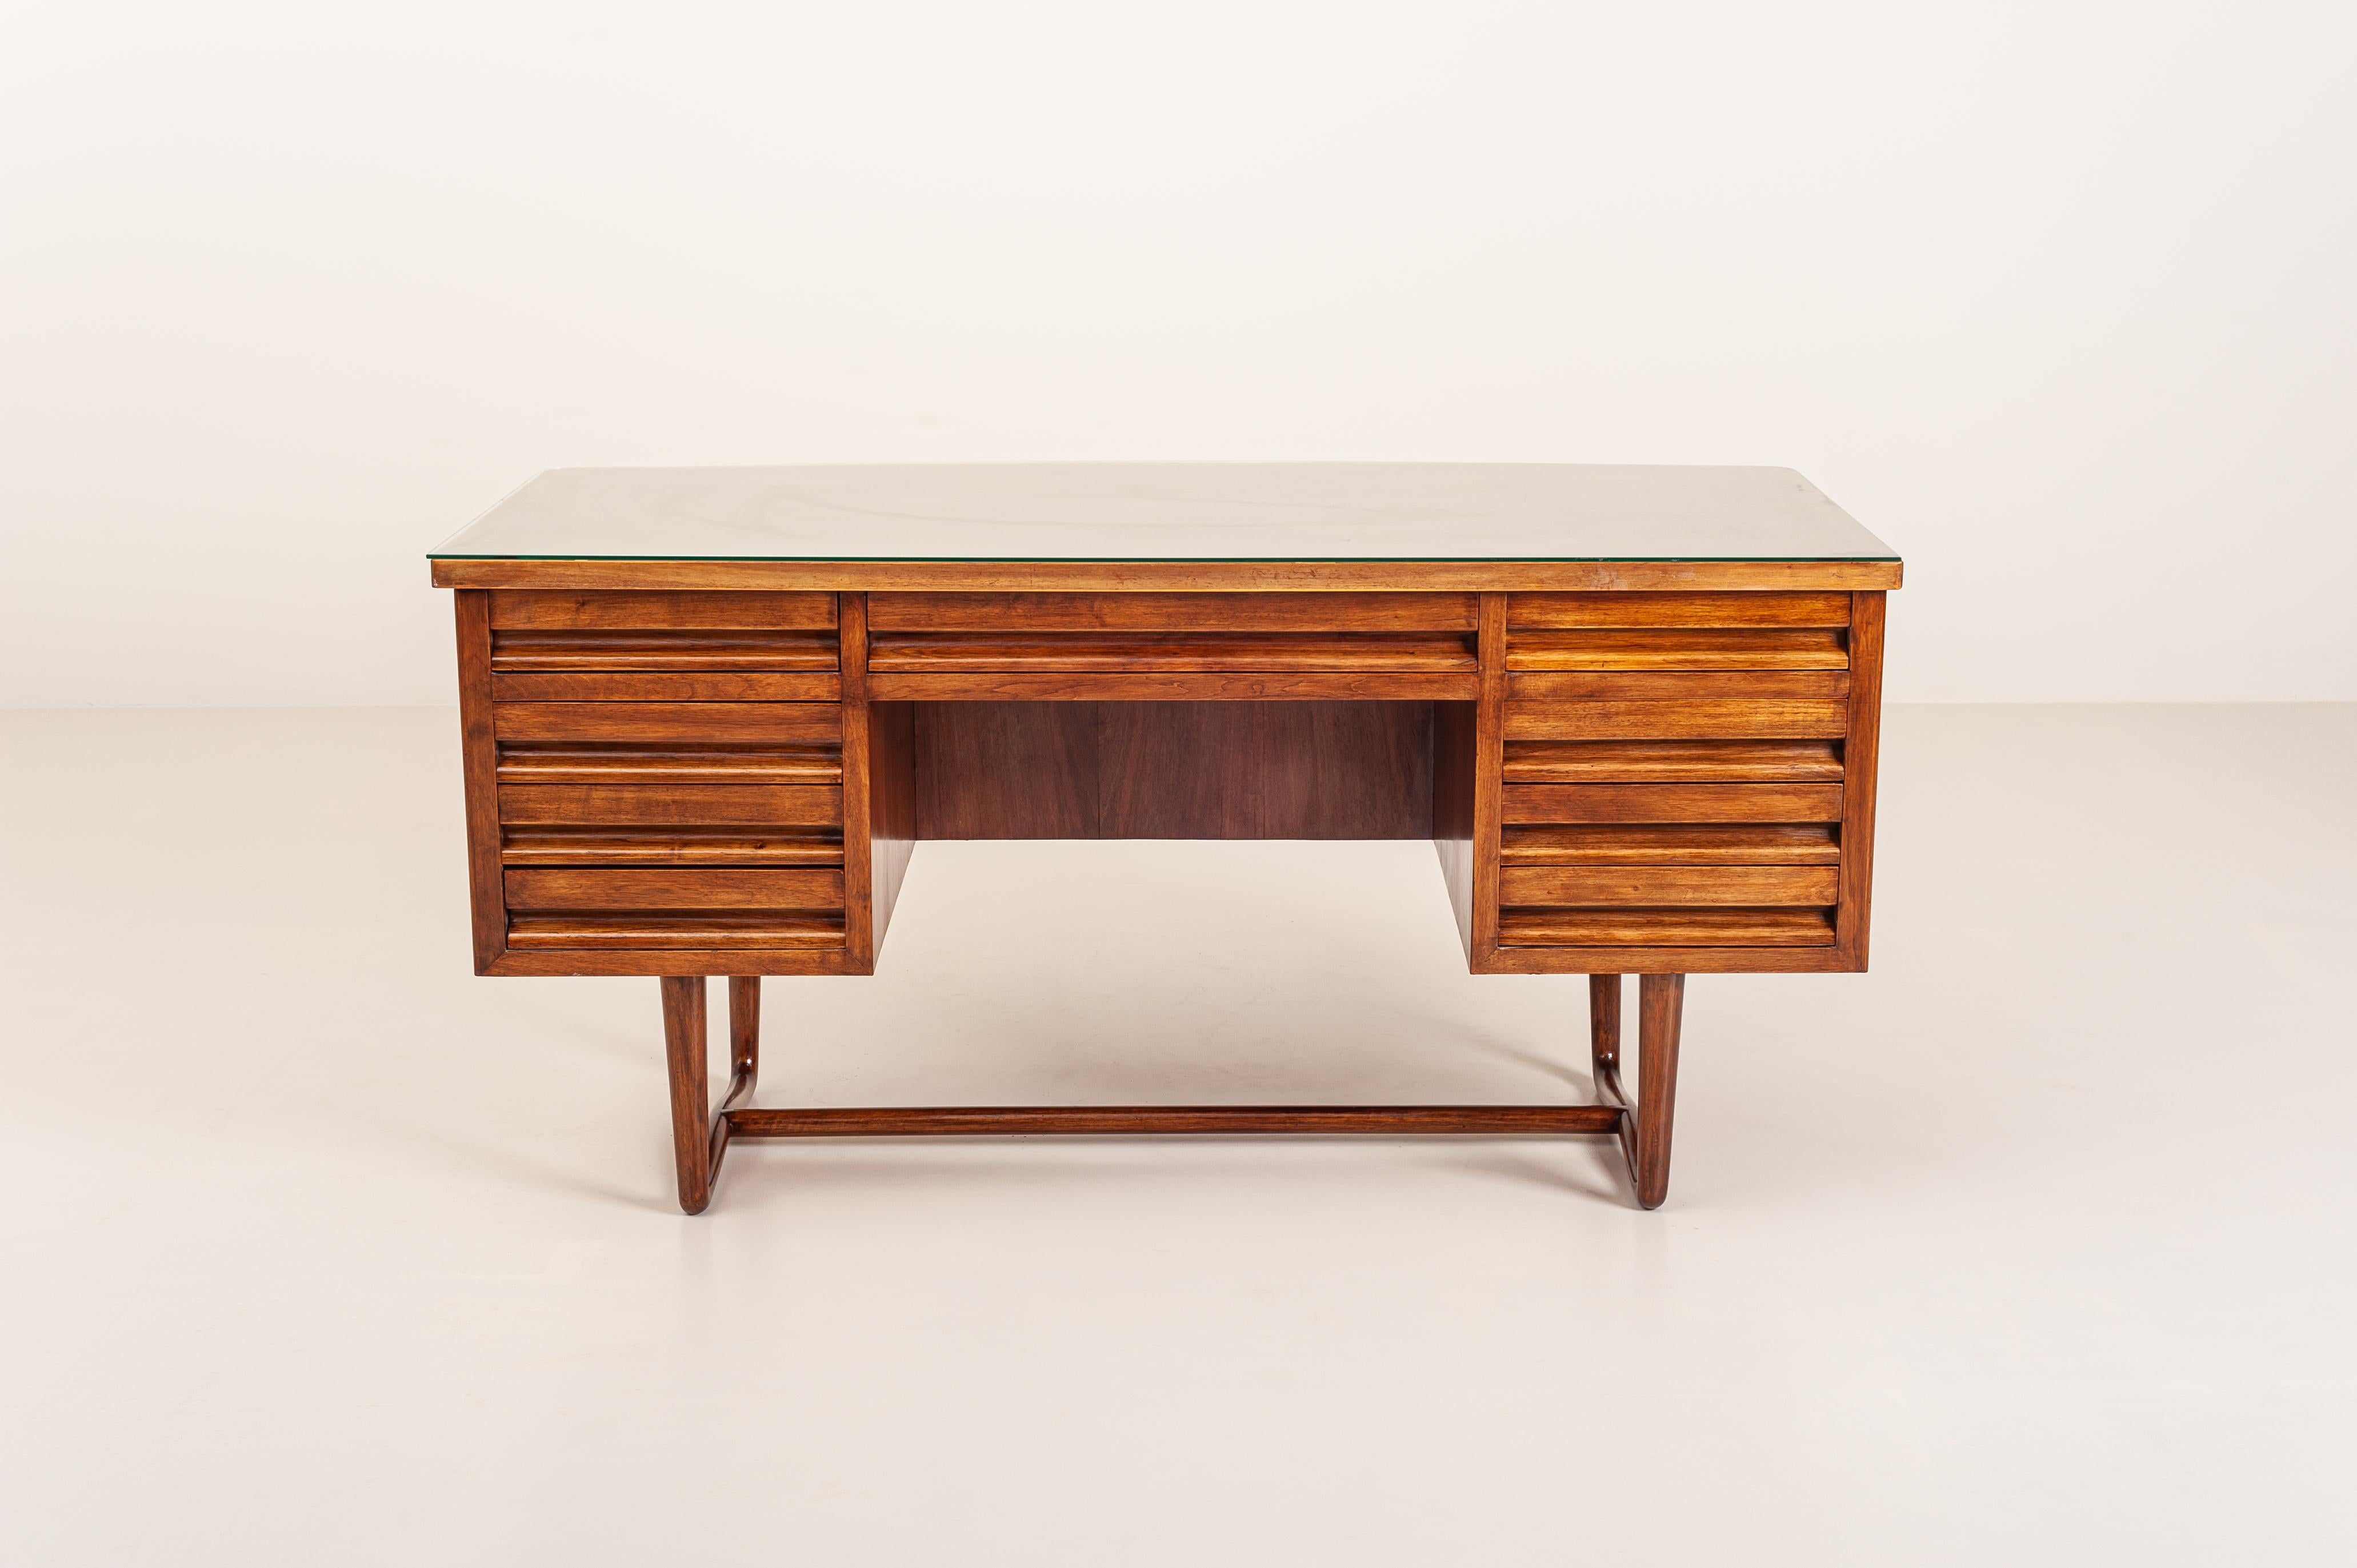 Mid-20th Century Italian Executive Grissinato Desk Made in Walnut with Carved Legs and Glass Top